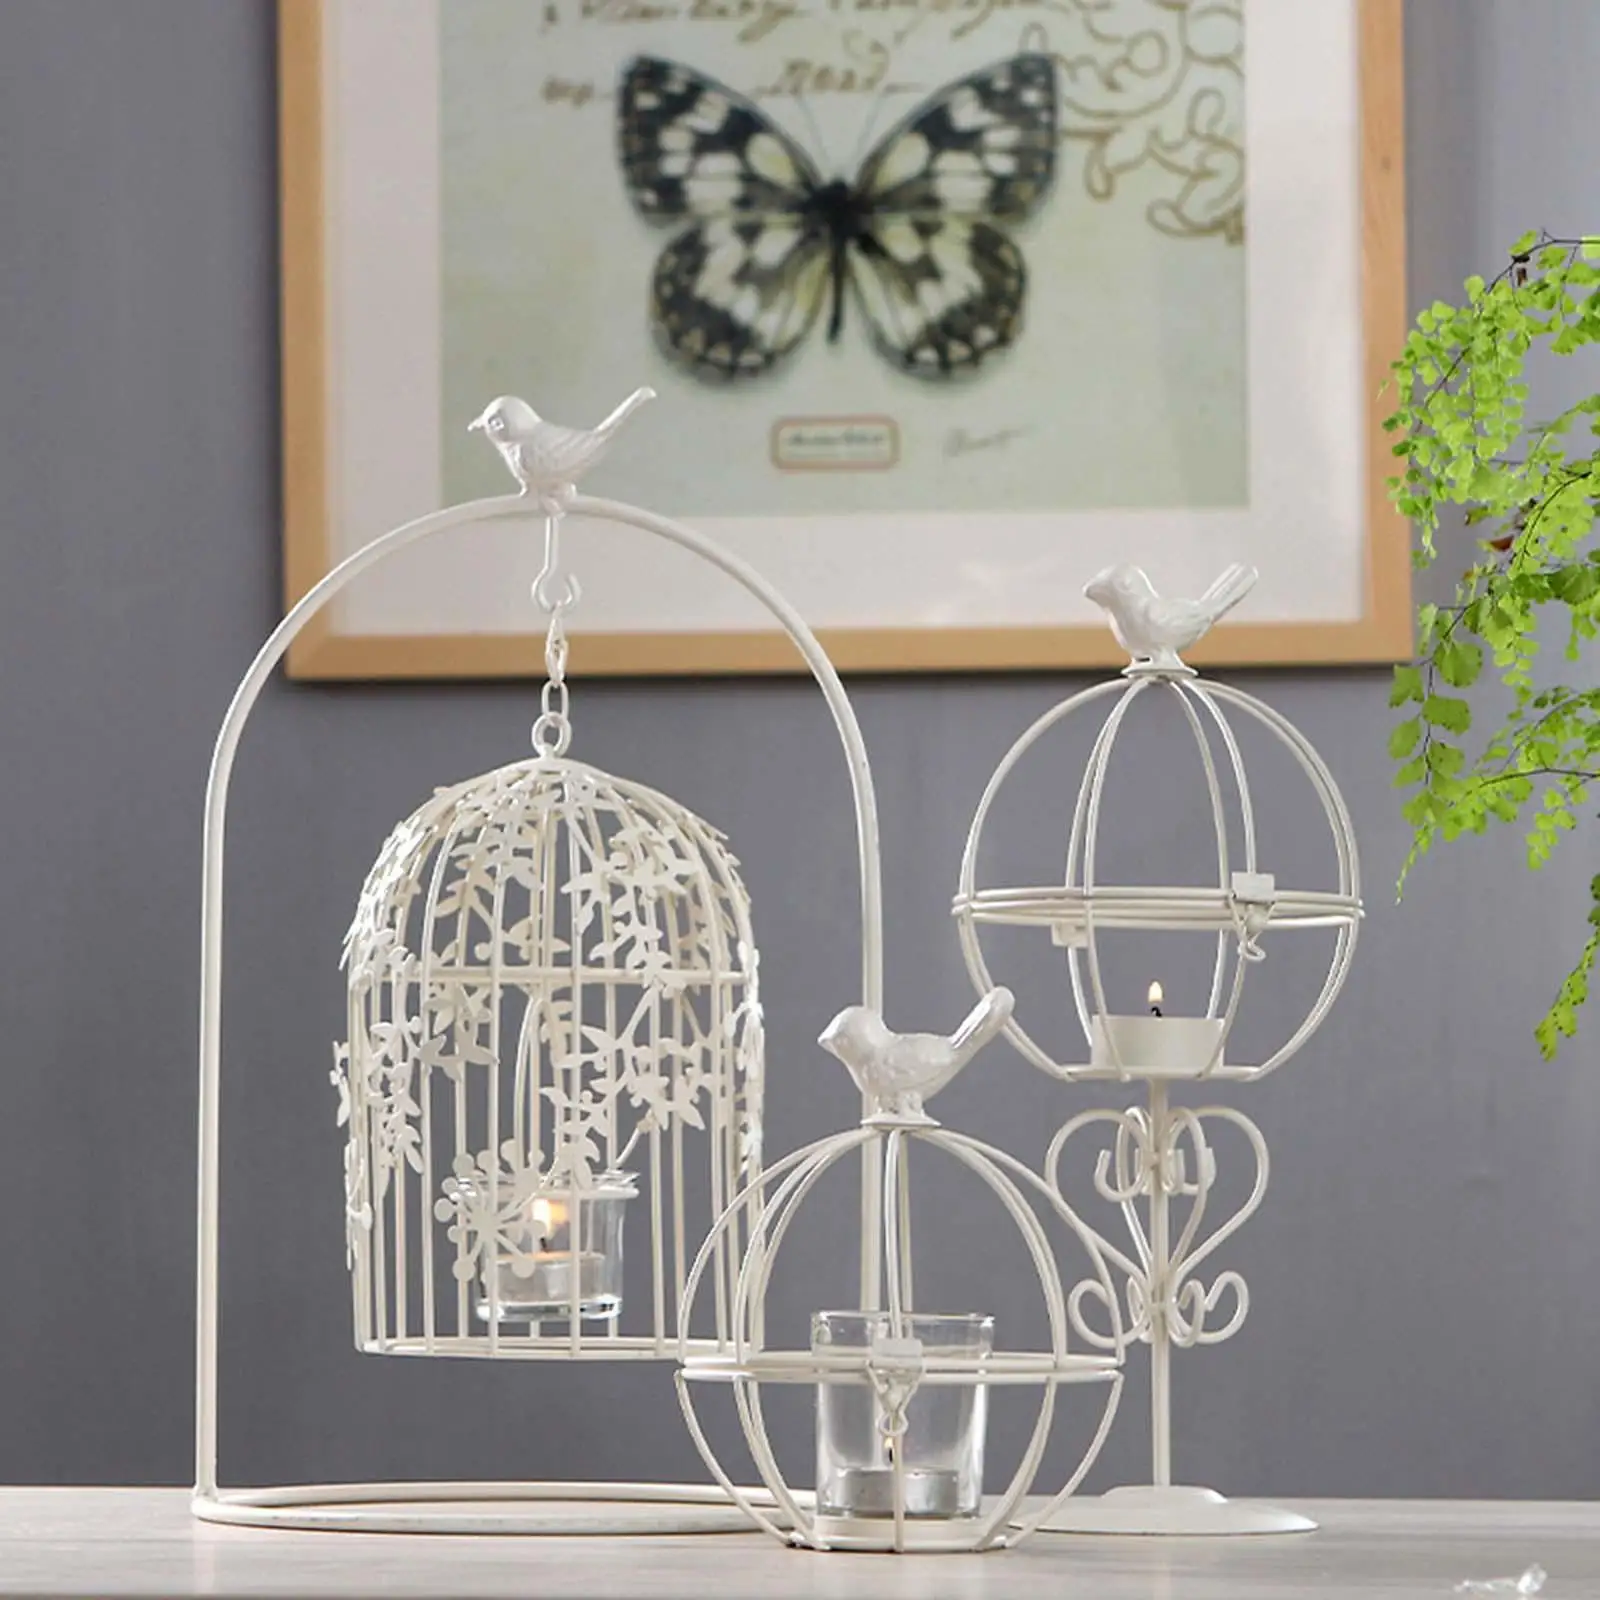 Decorative Bird Cage Candle Holder Vintage Candle Holder for Wedding Candle Centerpieces Home Living Room Holiday Decoration